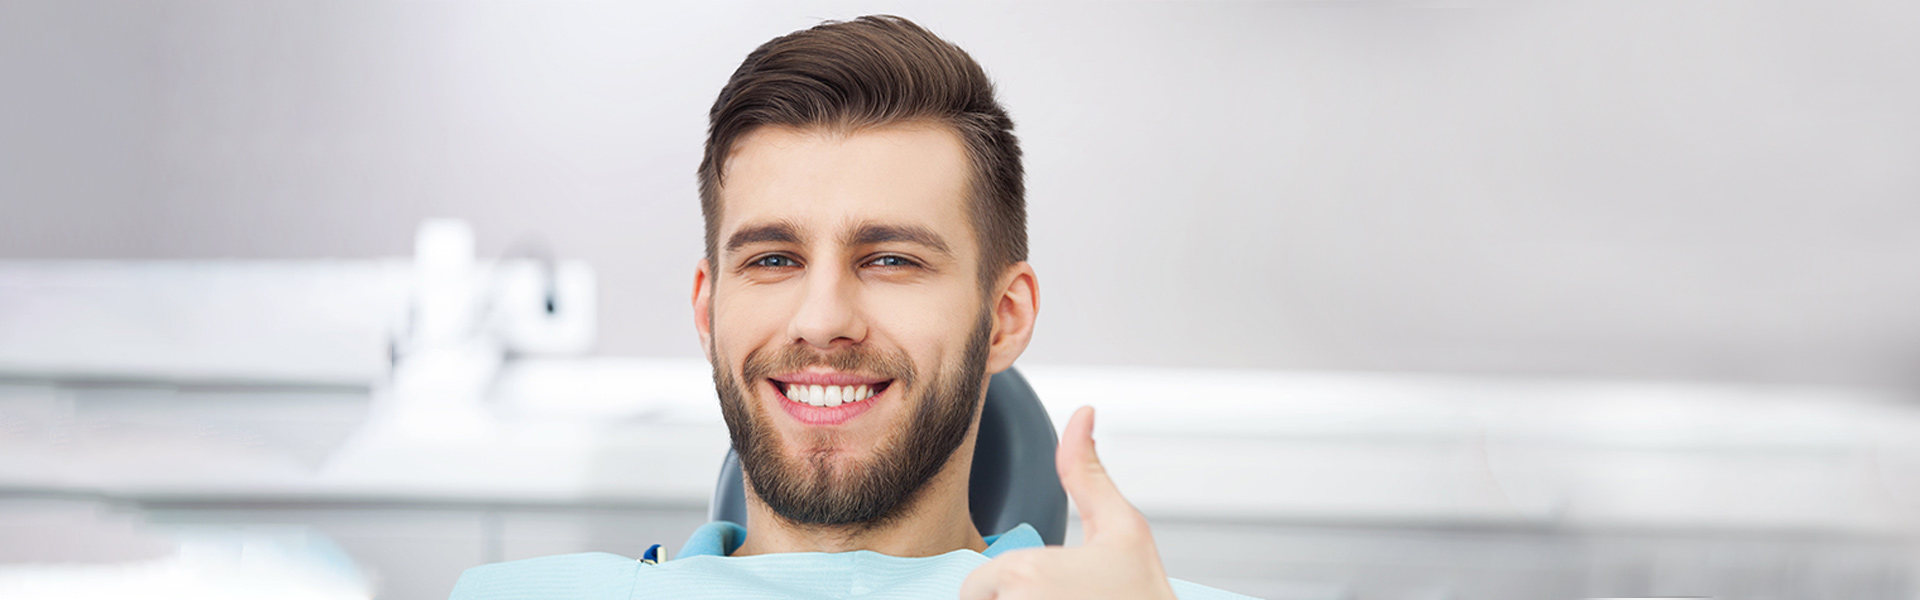 How root canal treatment matters to your dental health